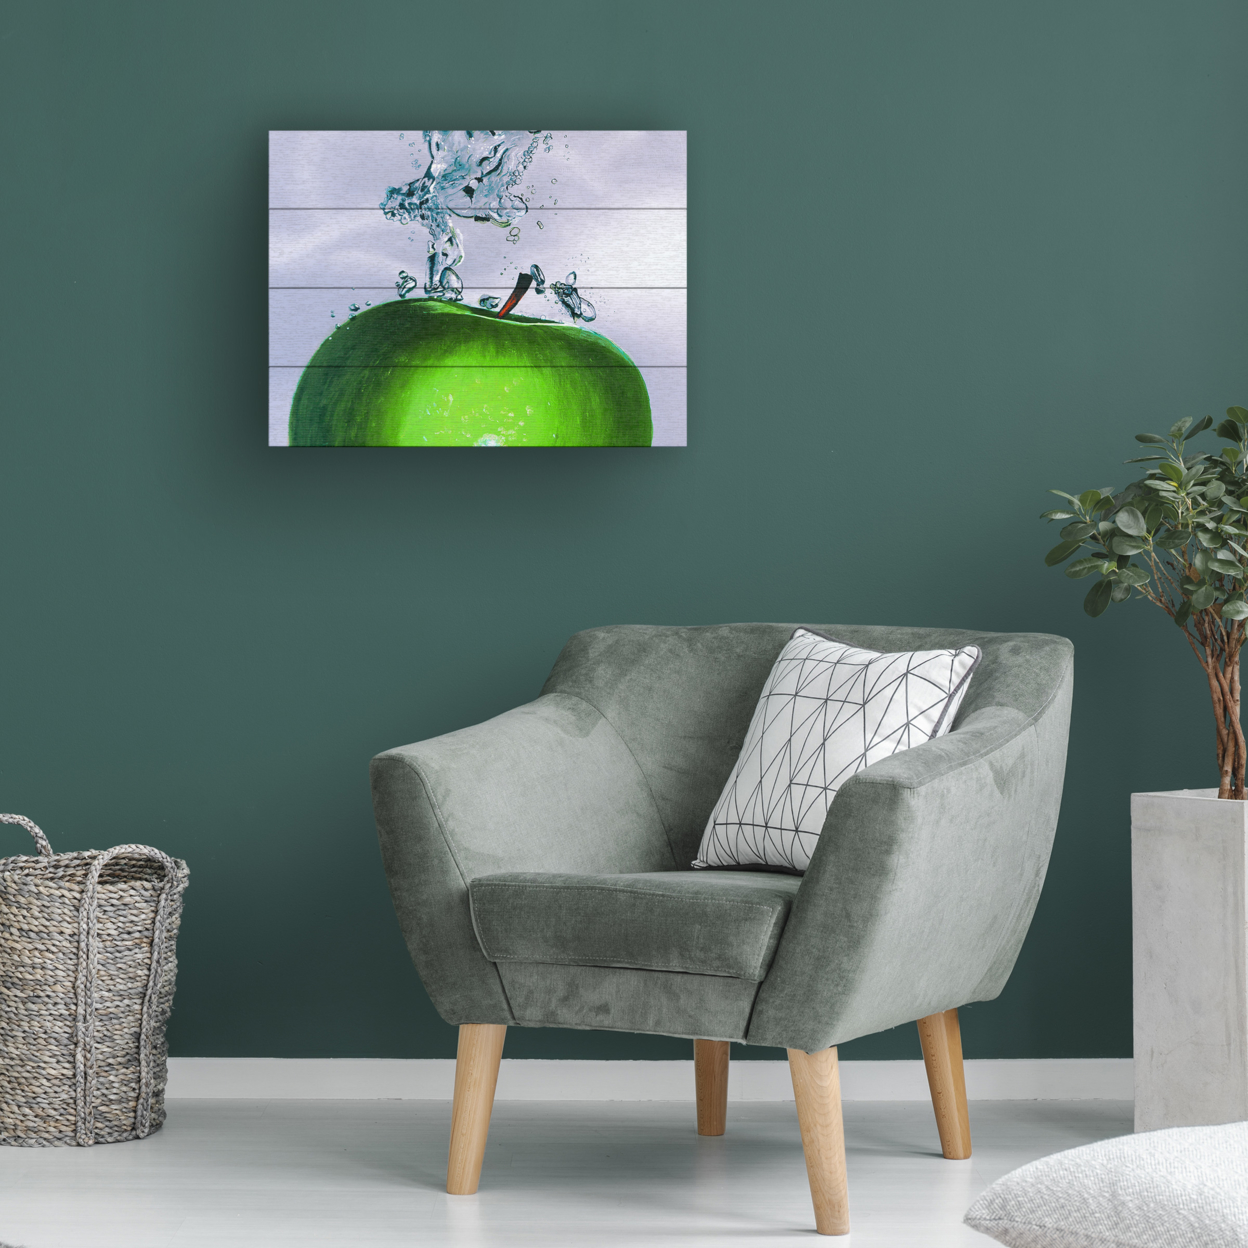 Wall Art 12 X 16 Inches Titled Apple Splash II Ready To Hang Printed On Wooden Planks